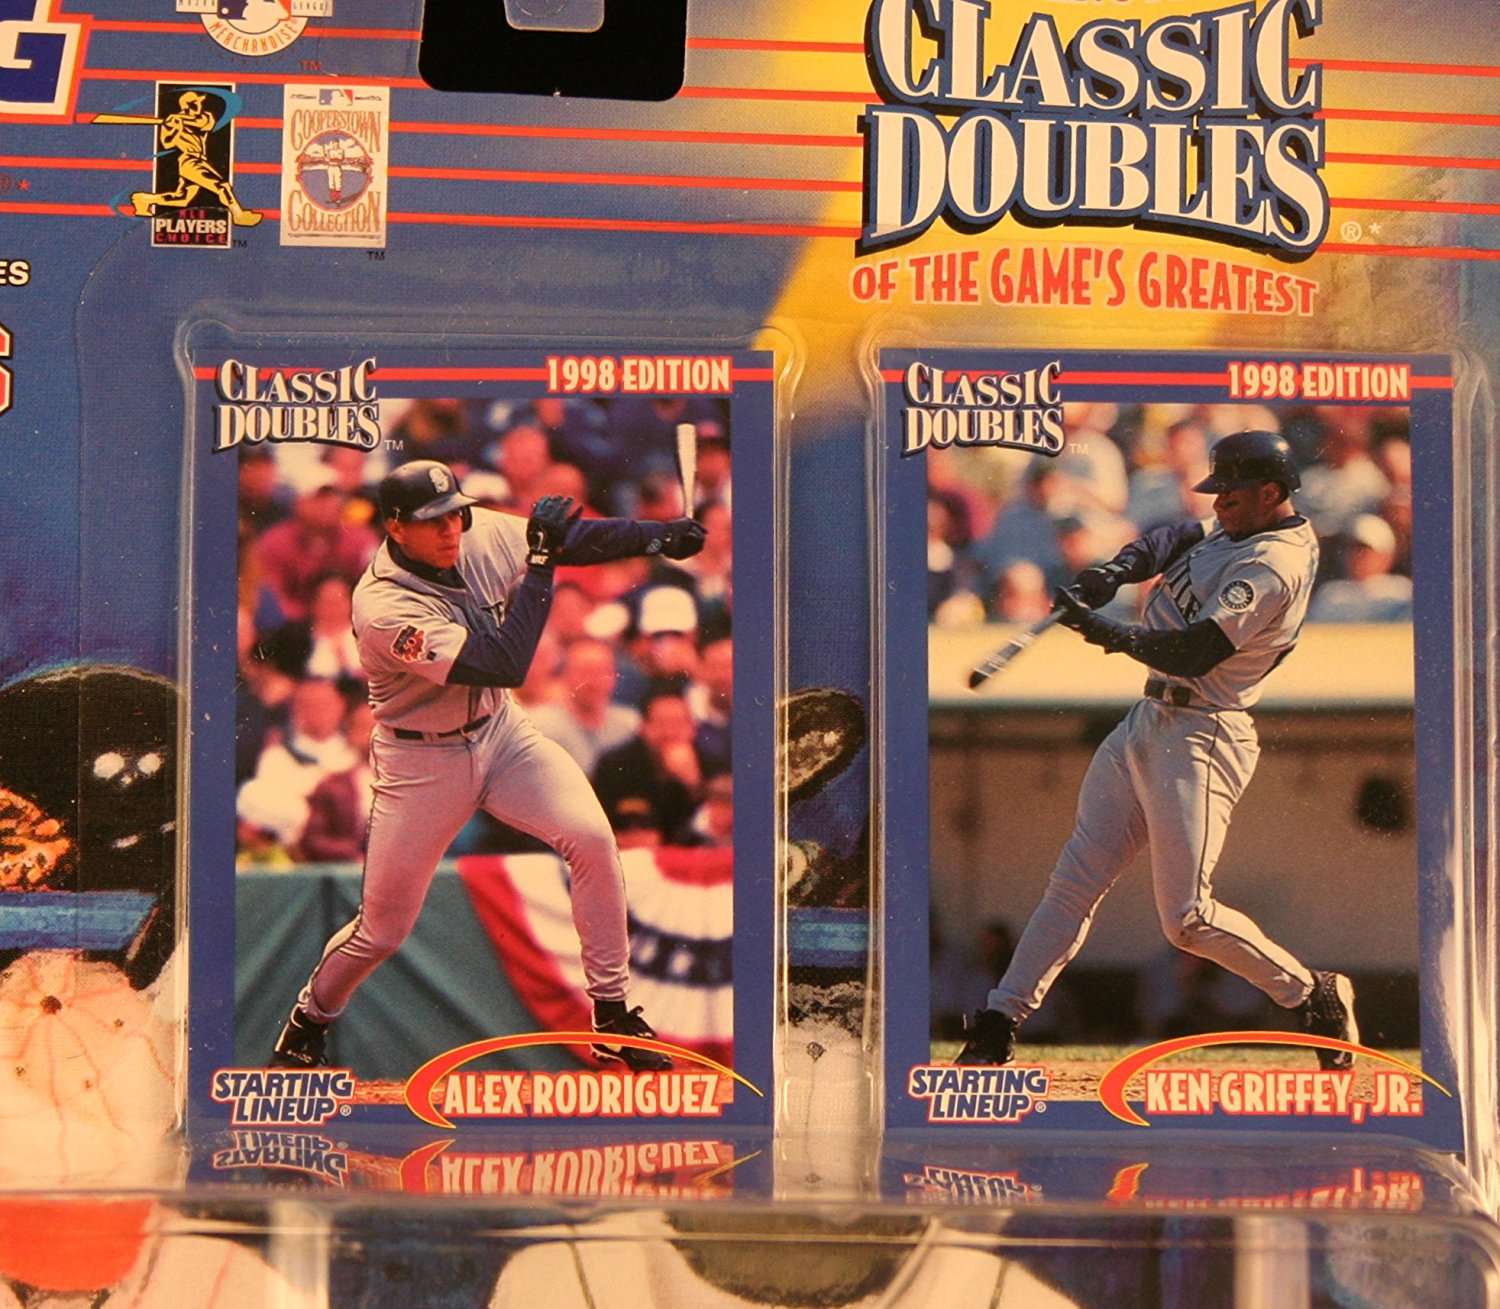 ALEX RODRIGUEZ / SEATTLE MARINERS & KEN GRIFFEY JR. / SEATTLE MARINERS 1998 MLB Classic Doubles * Winning Pairs Series * Starting Lineup Action Figures & Exclusive Collector Trading Cards